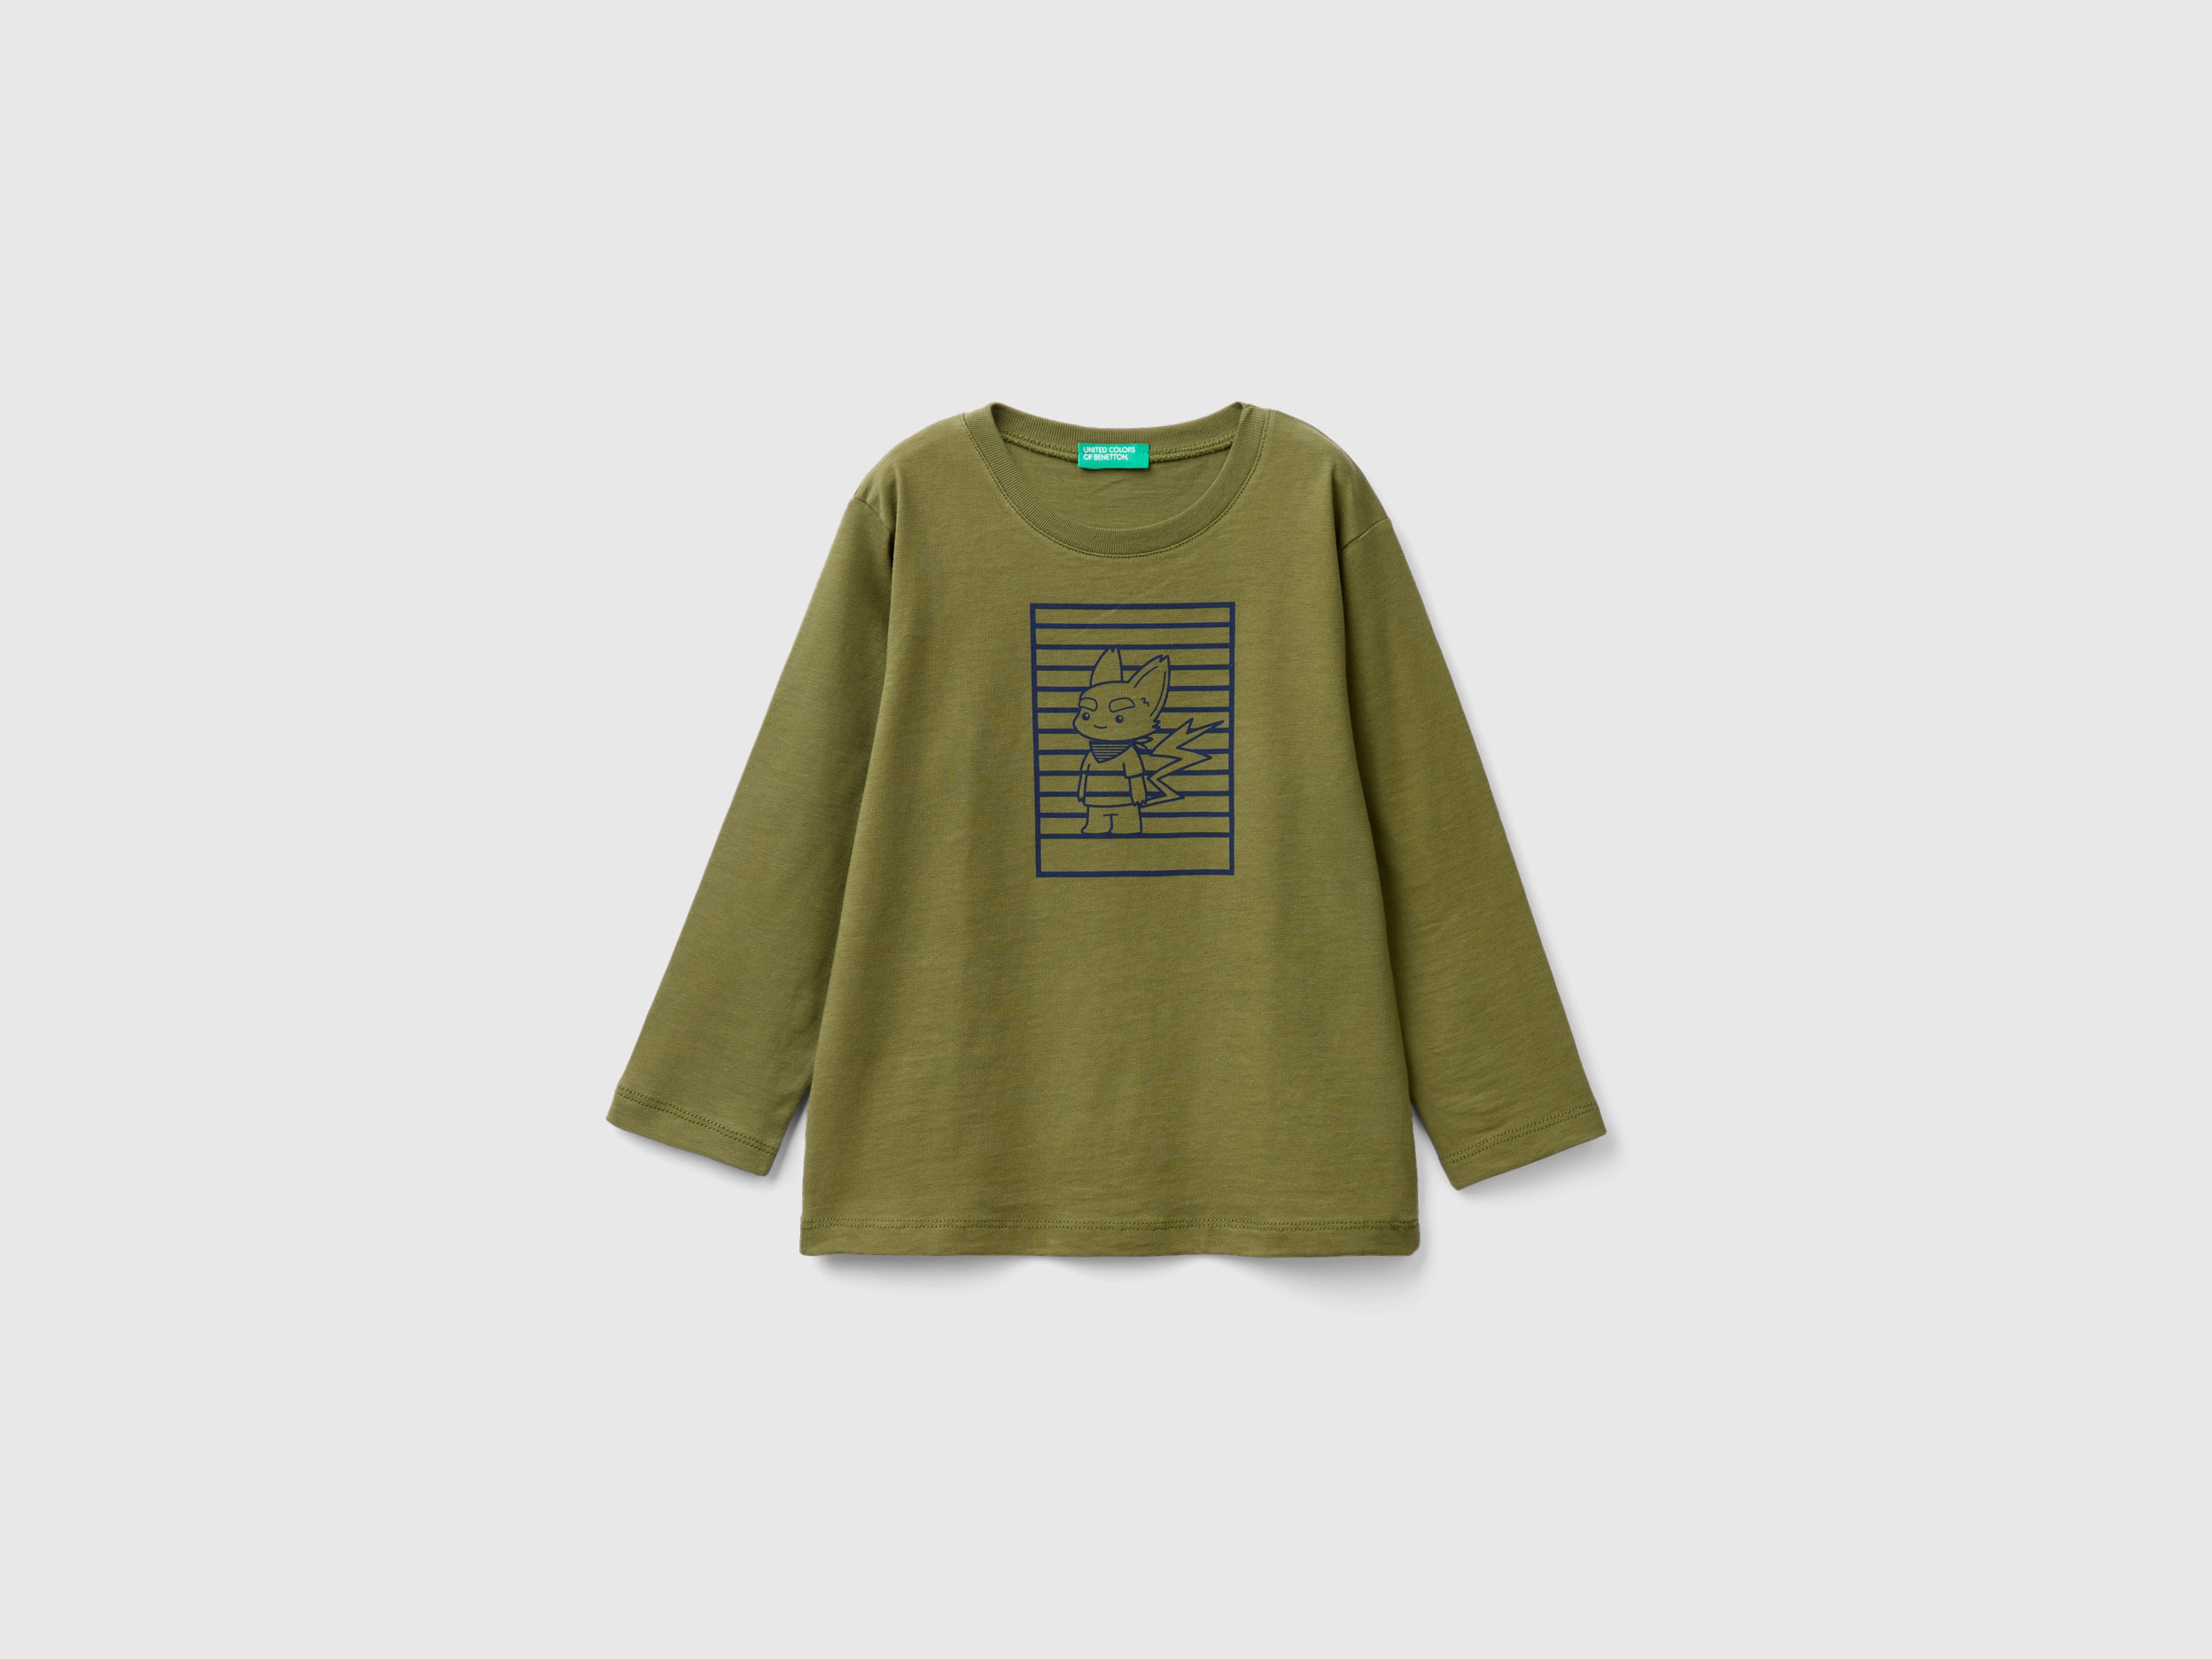 Benetton, Sweater In Cotton With Print, size 2-3, Military Green, Kids